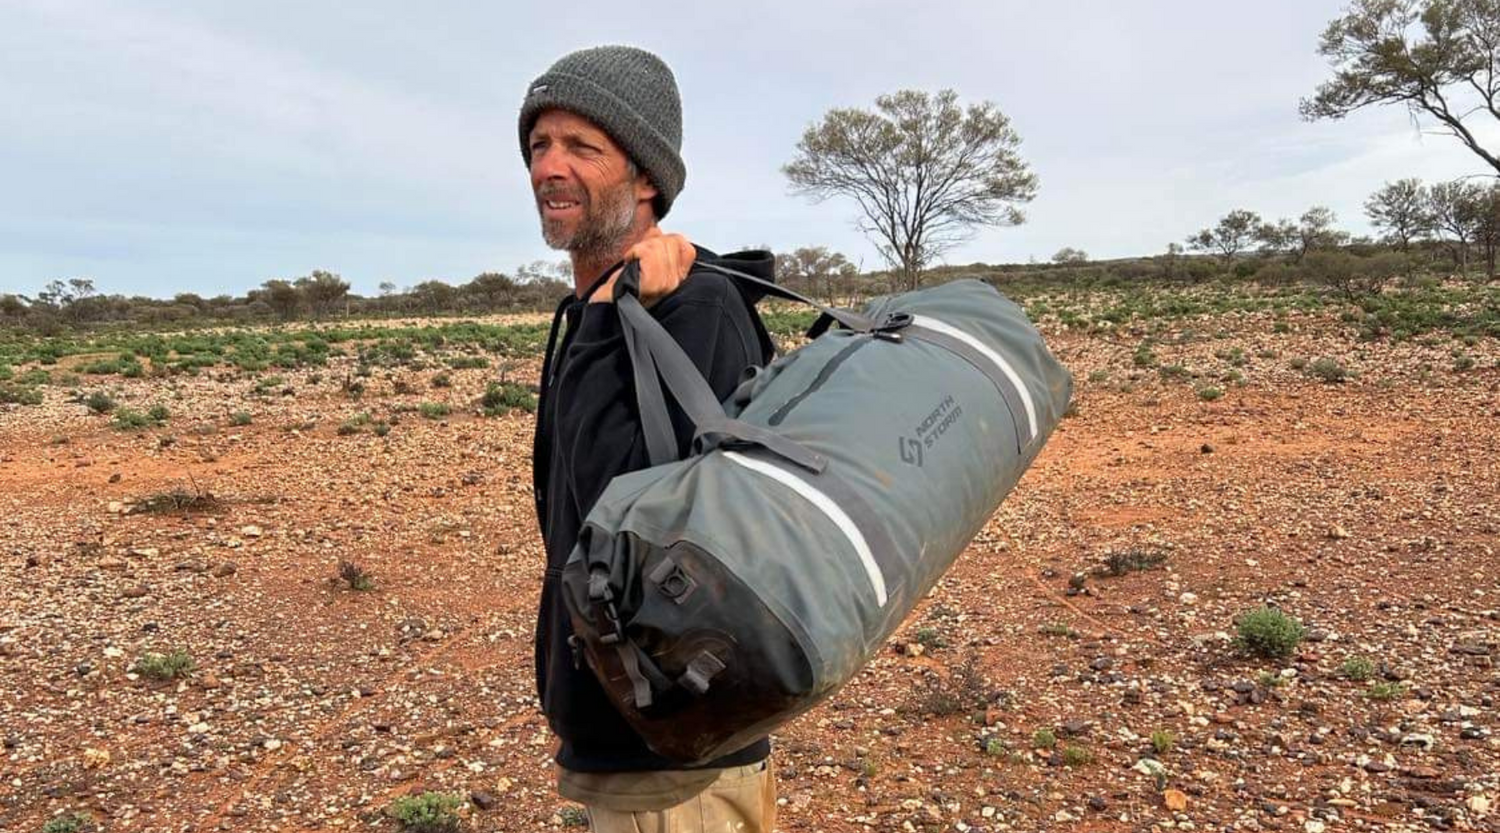 Man holding a North Storm waterproof duffel bag standing in the outback of Western Australia.